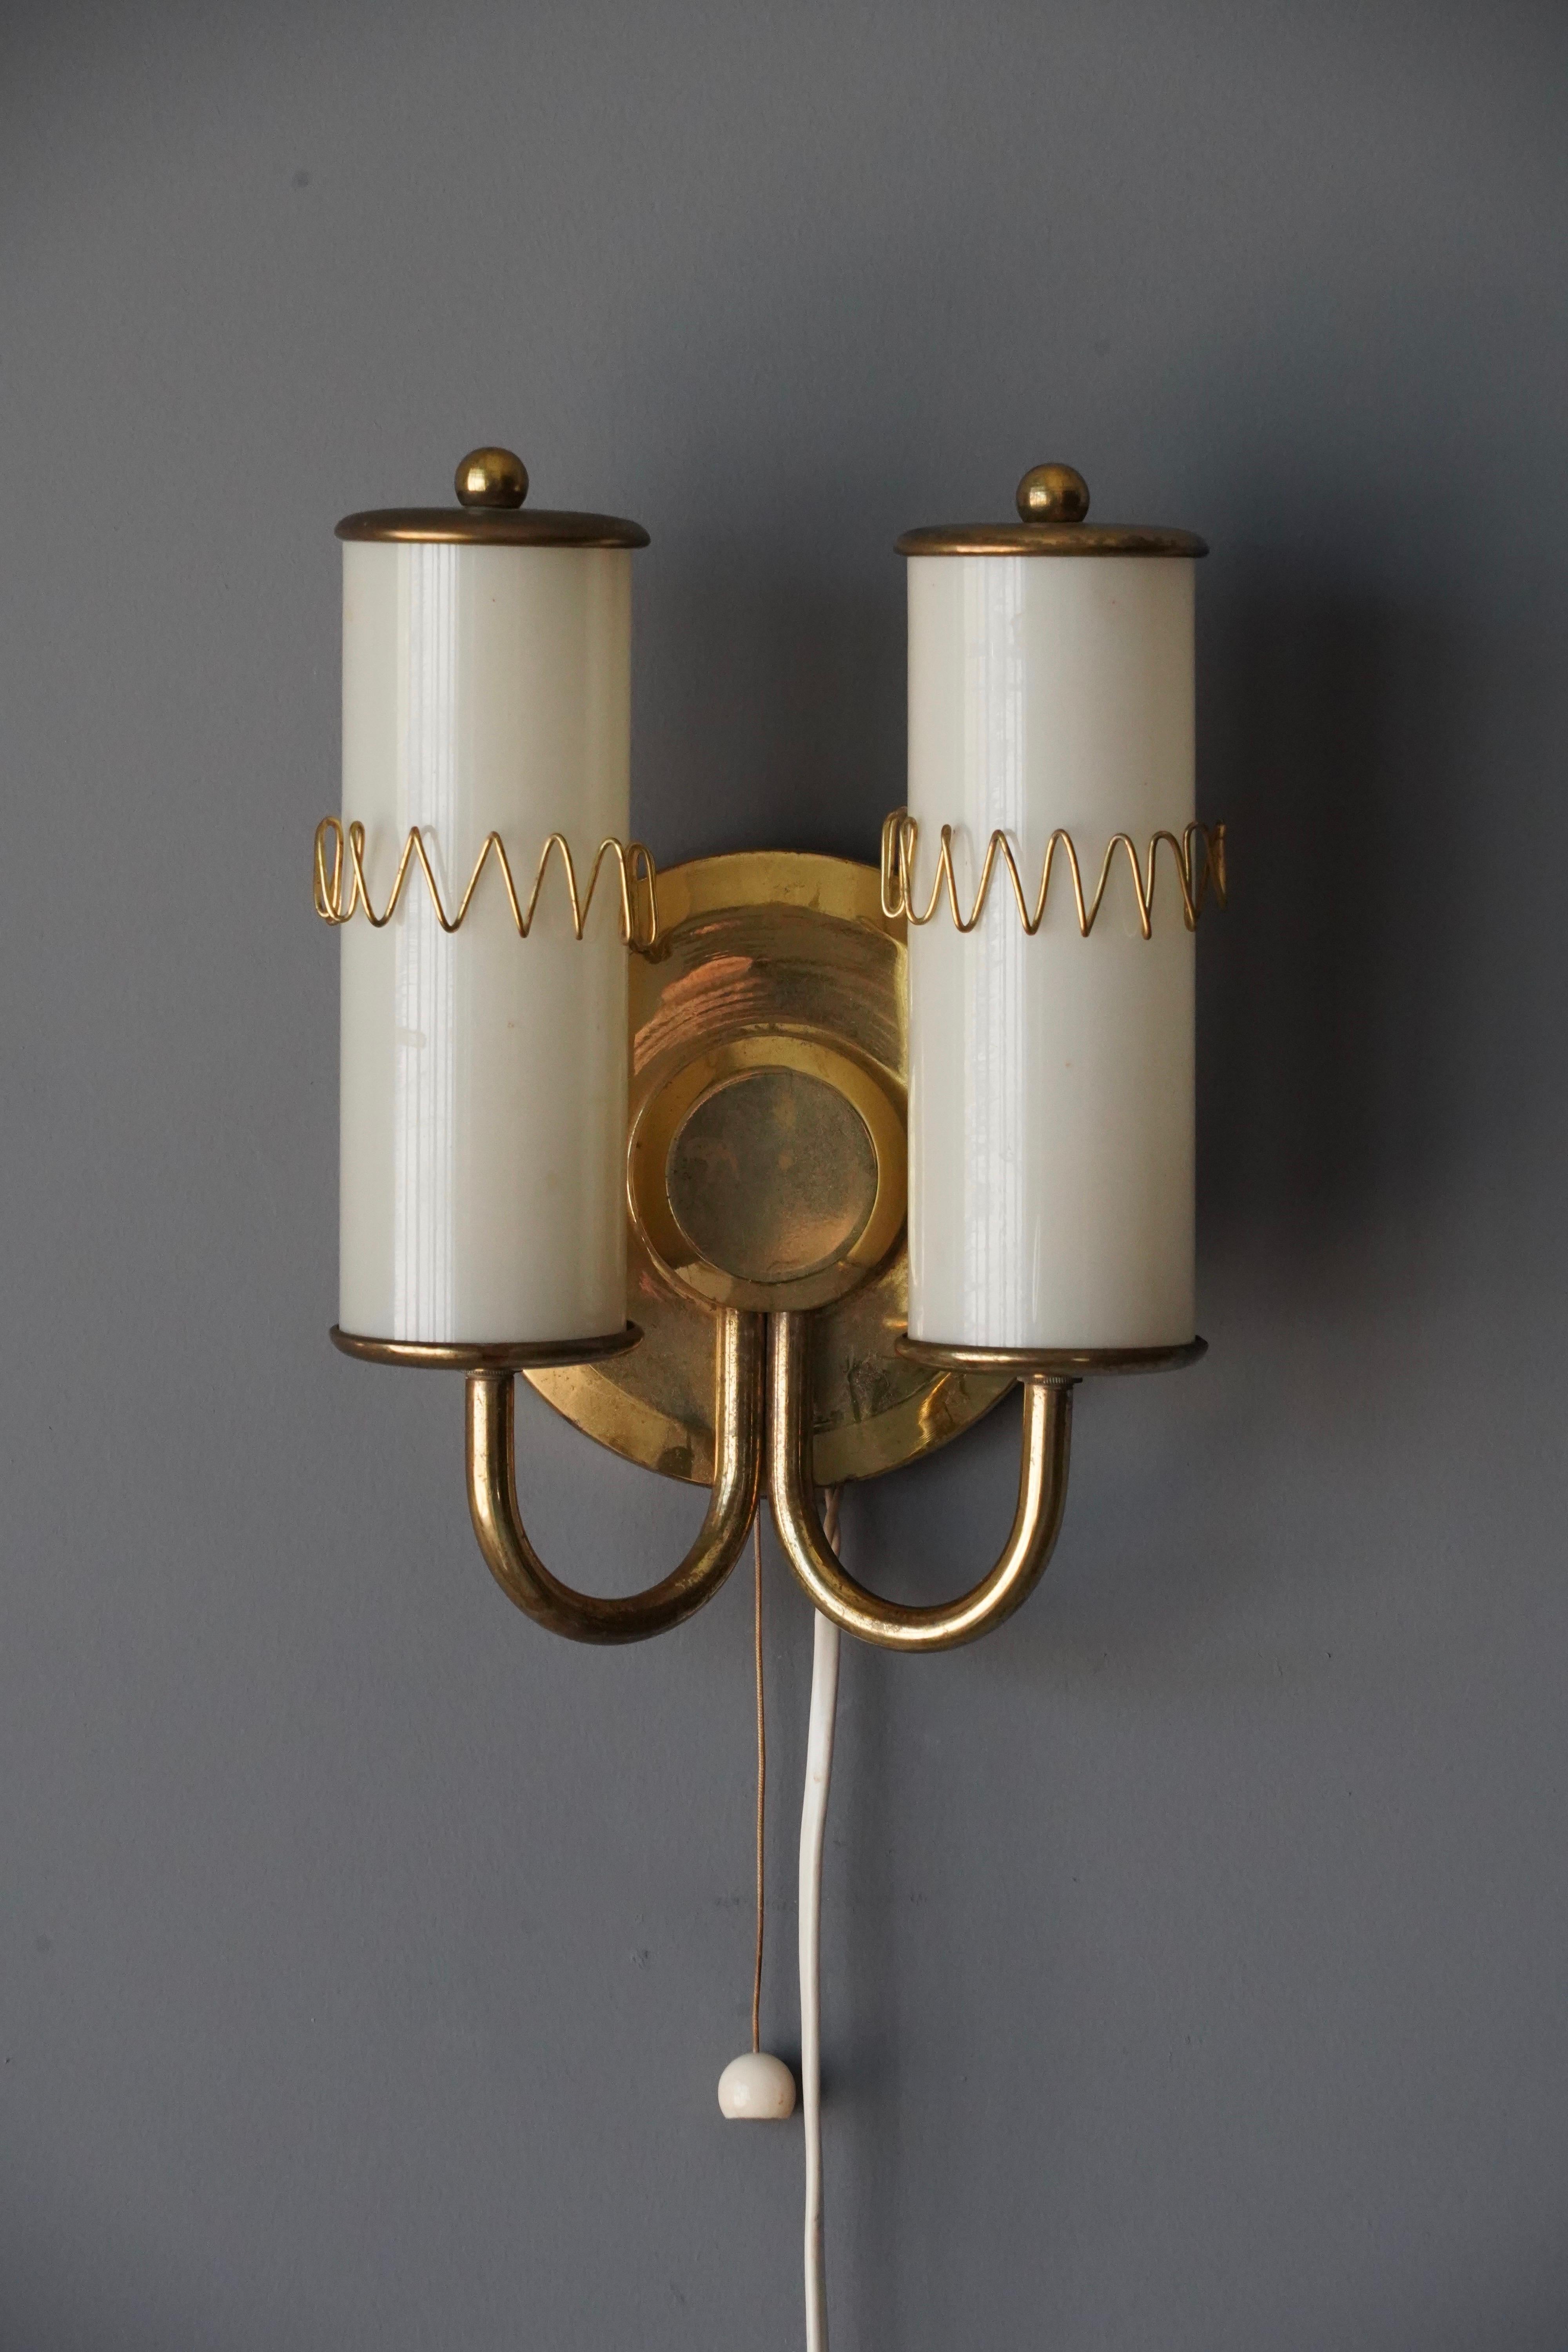 A wall light. Designed and produced in Sweden, c. 1940s-1950s. Features brass milk glass diffusers

Dimensions include shade. Shade is included in purchase. Configured for plug in. Please review wiring upon installation.

 